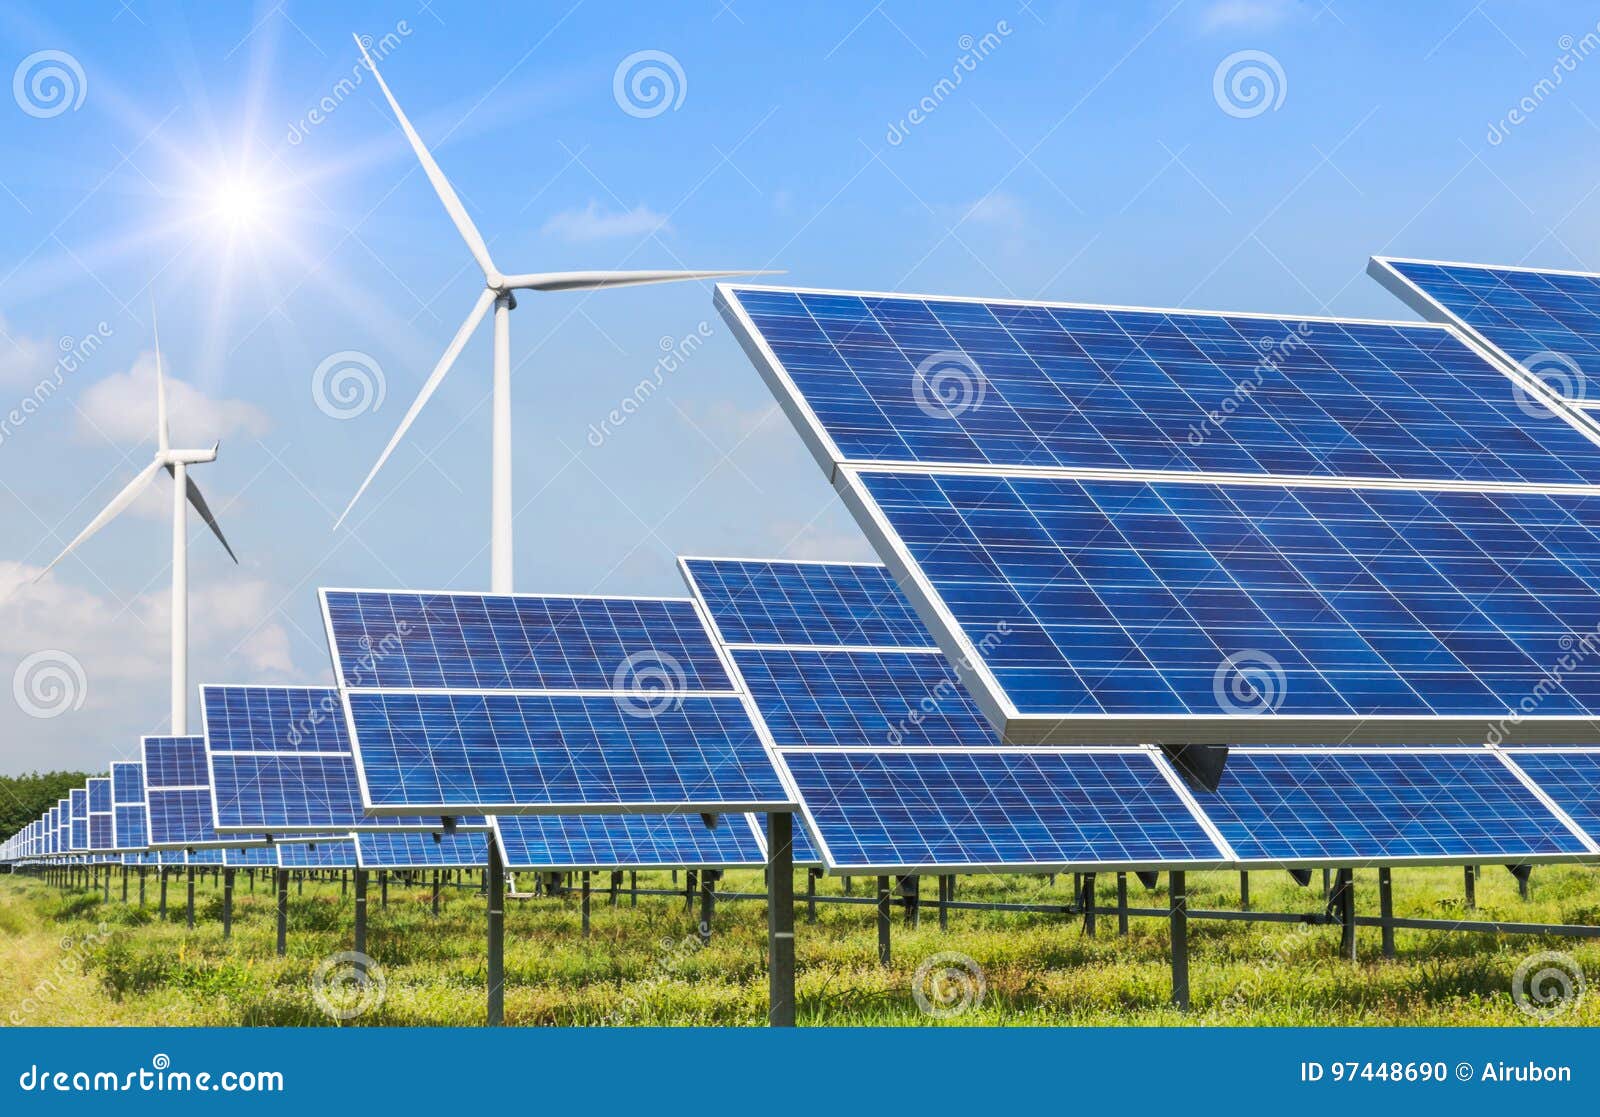 solar cells and wind turbines generating electricity in power station alternative renewable energy